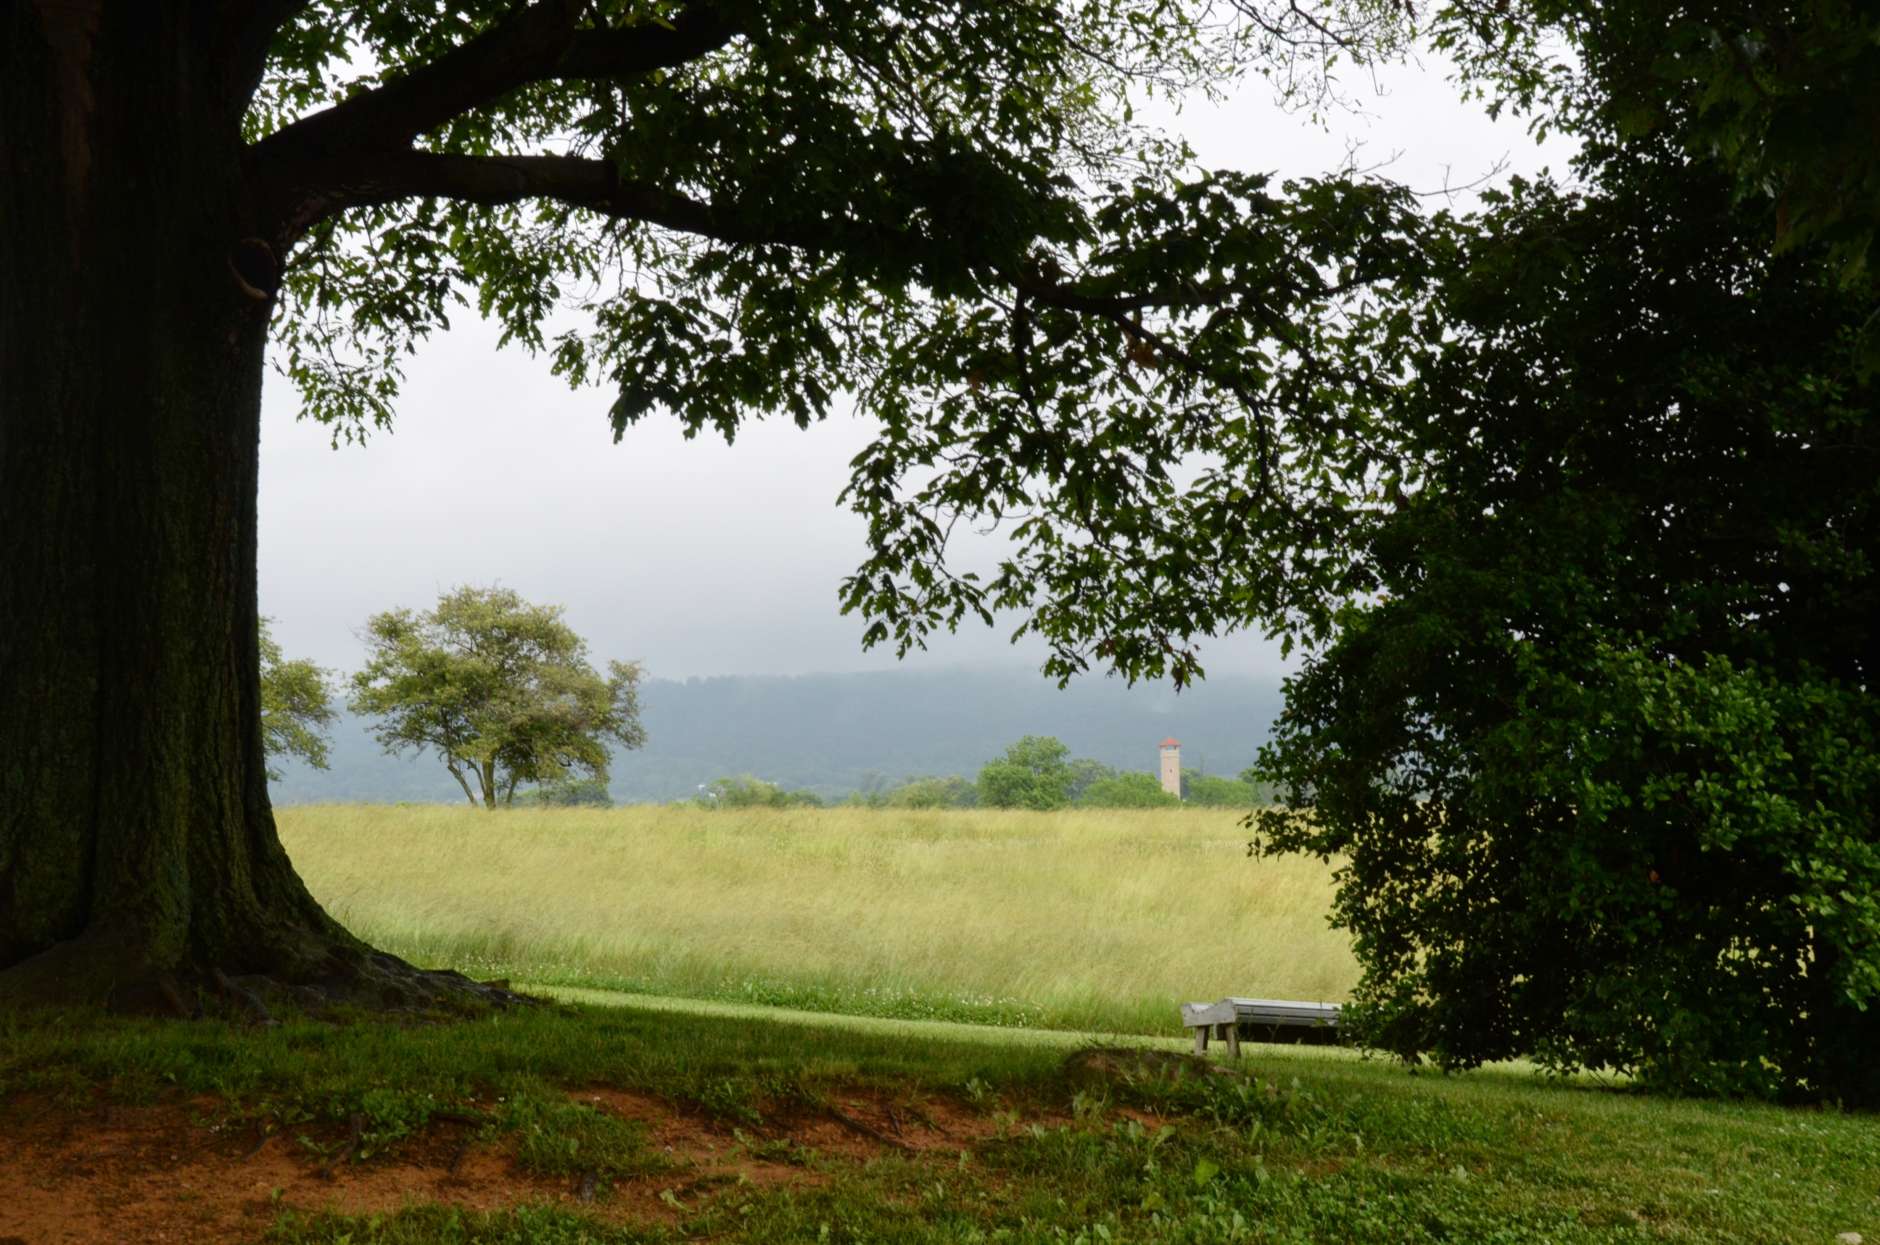 In this June 7, 2013, photo, the placid meadows and hills of Antietam National Battlefield in Sharpburg, Md., are a contrast with the Civil War violence that once raged across this land. So consuming is the serenity at Antietam that it can seduce you into ignoring the story of the mayhem that unfolded here on Sept. 17, 1862.(AP Photo/Cal Woodward)